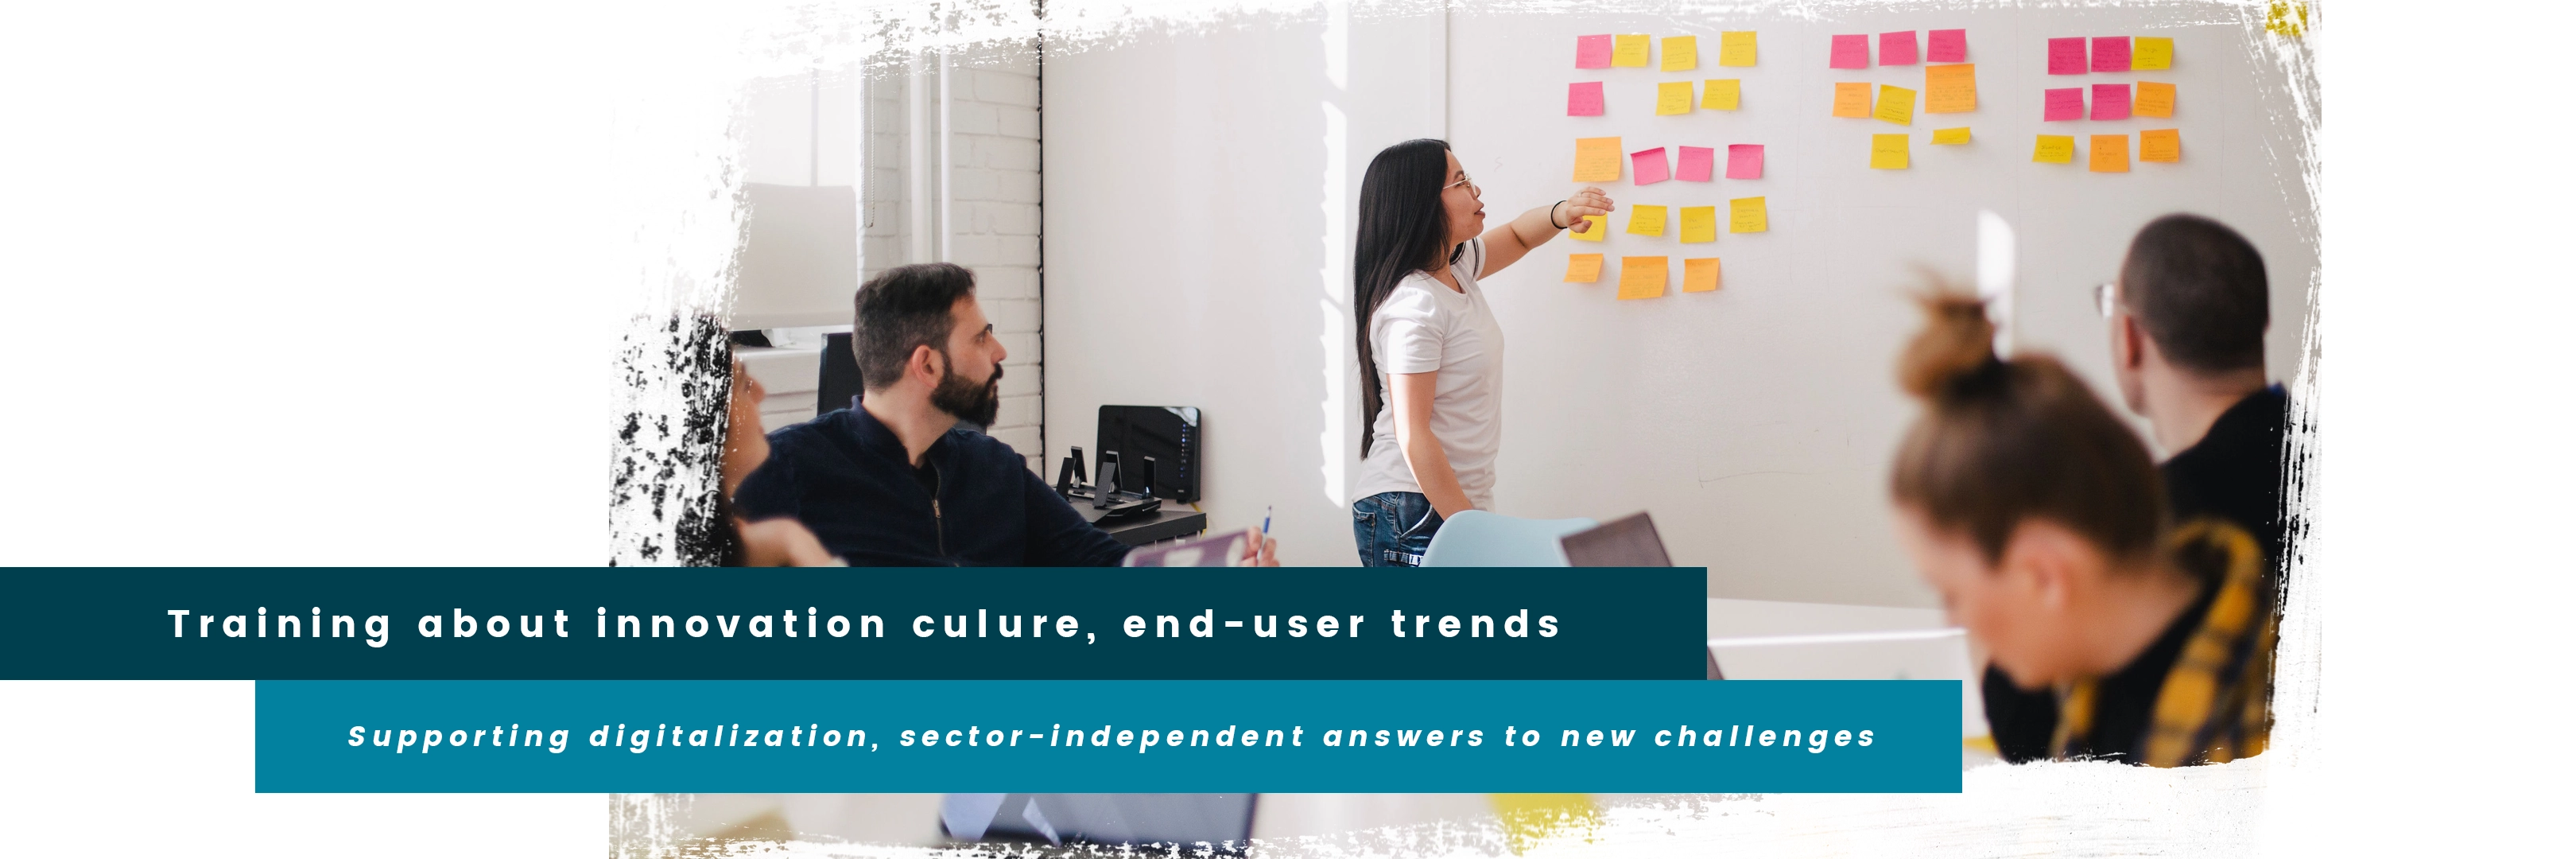 Training, end-user trends